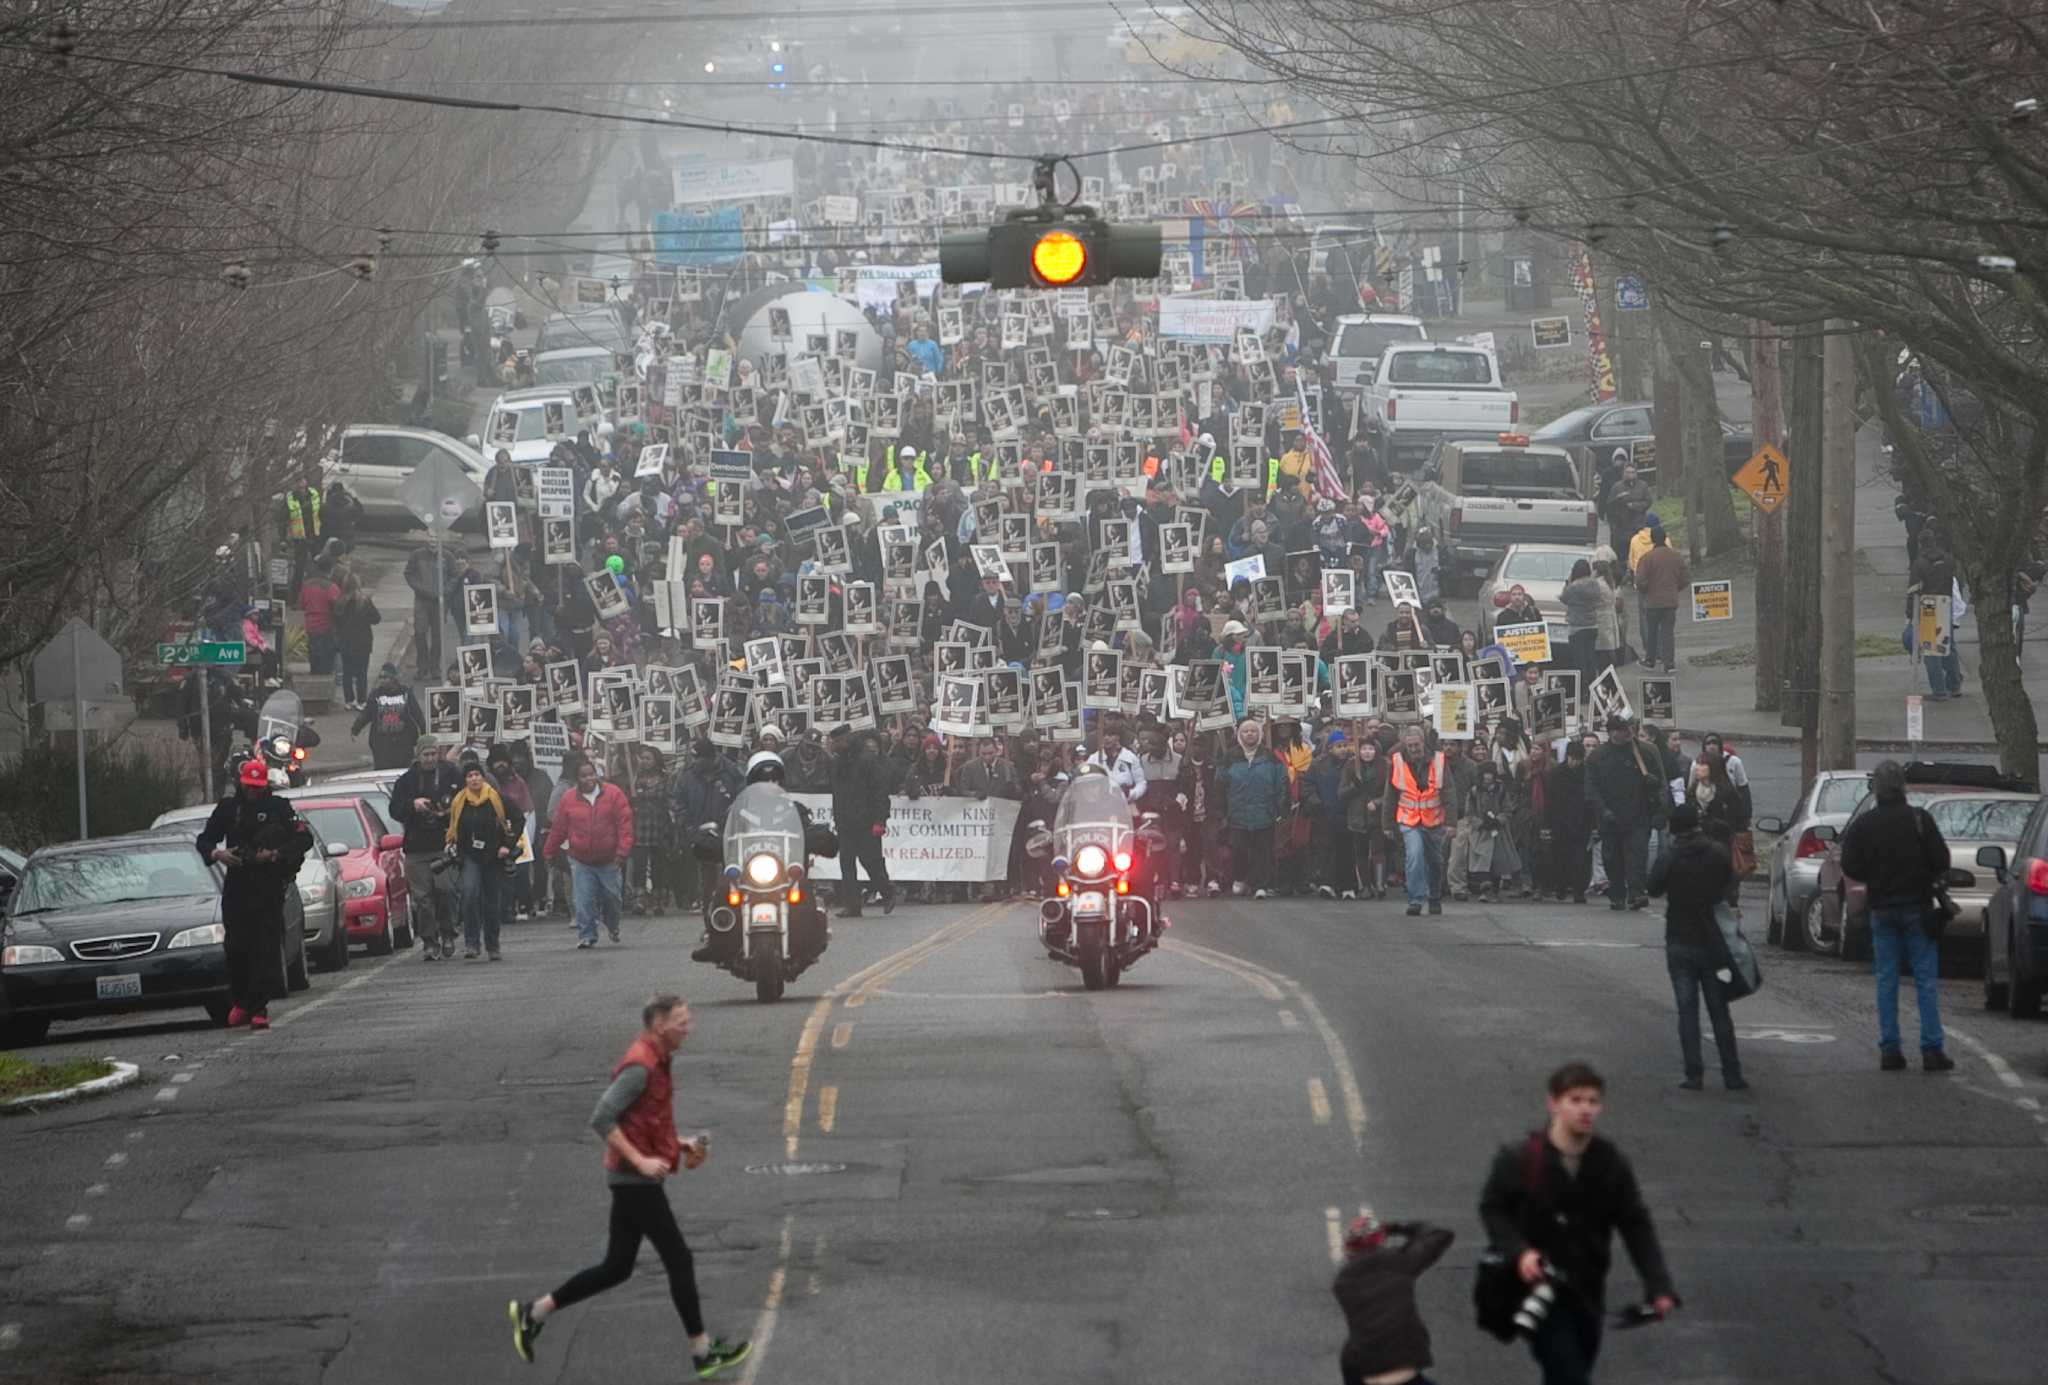 Seattle marches to honor MLK